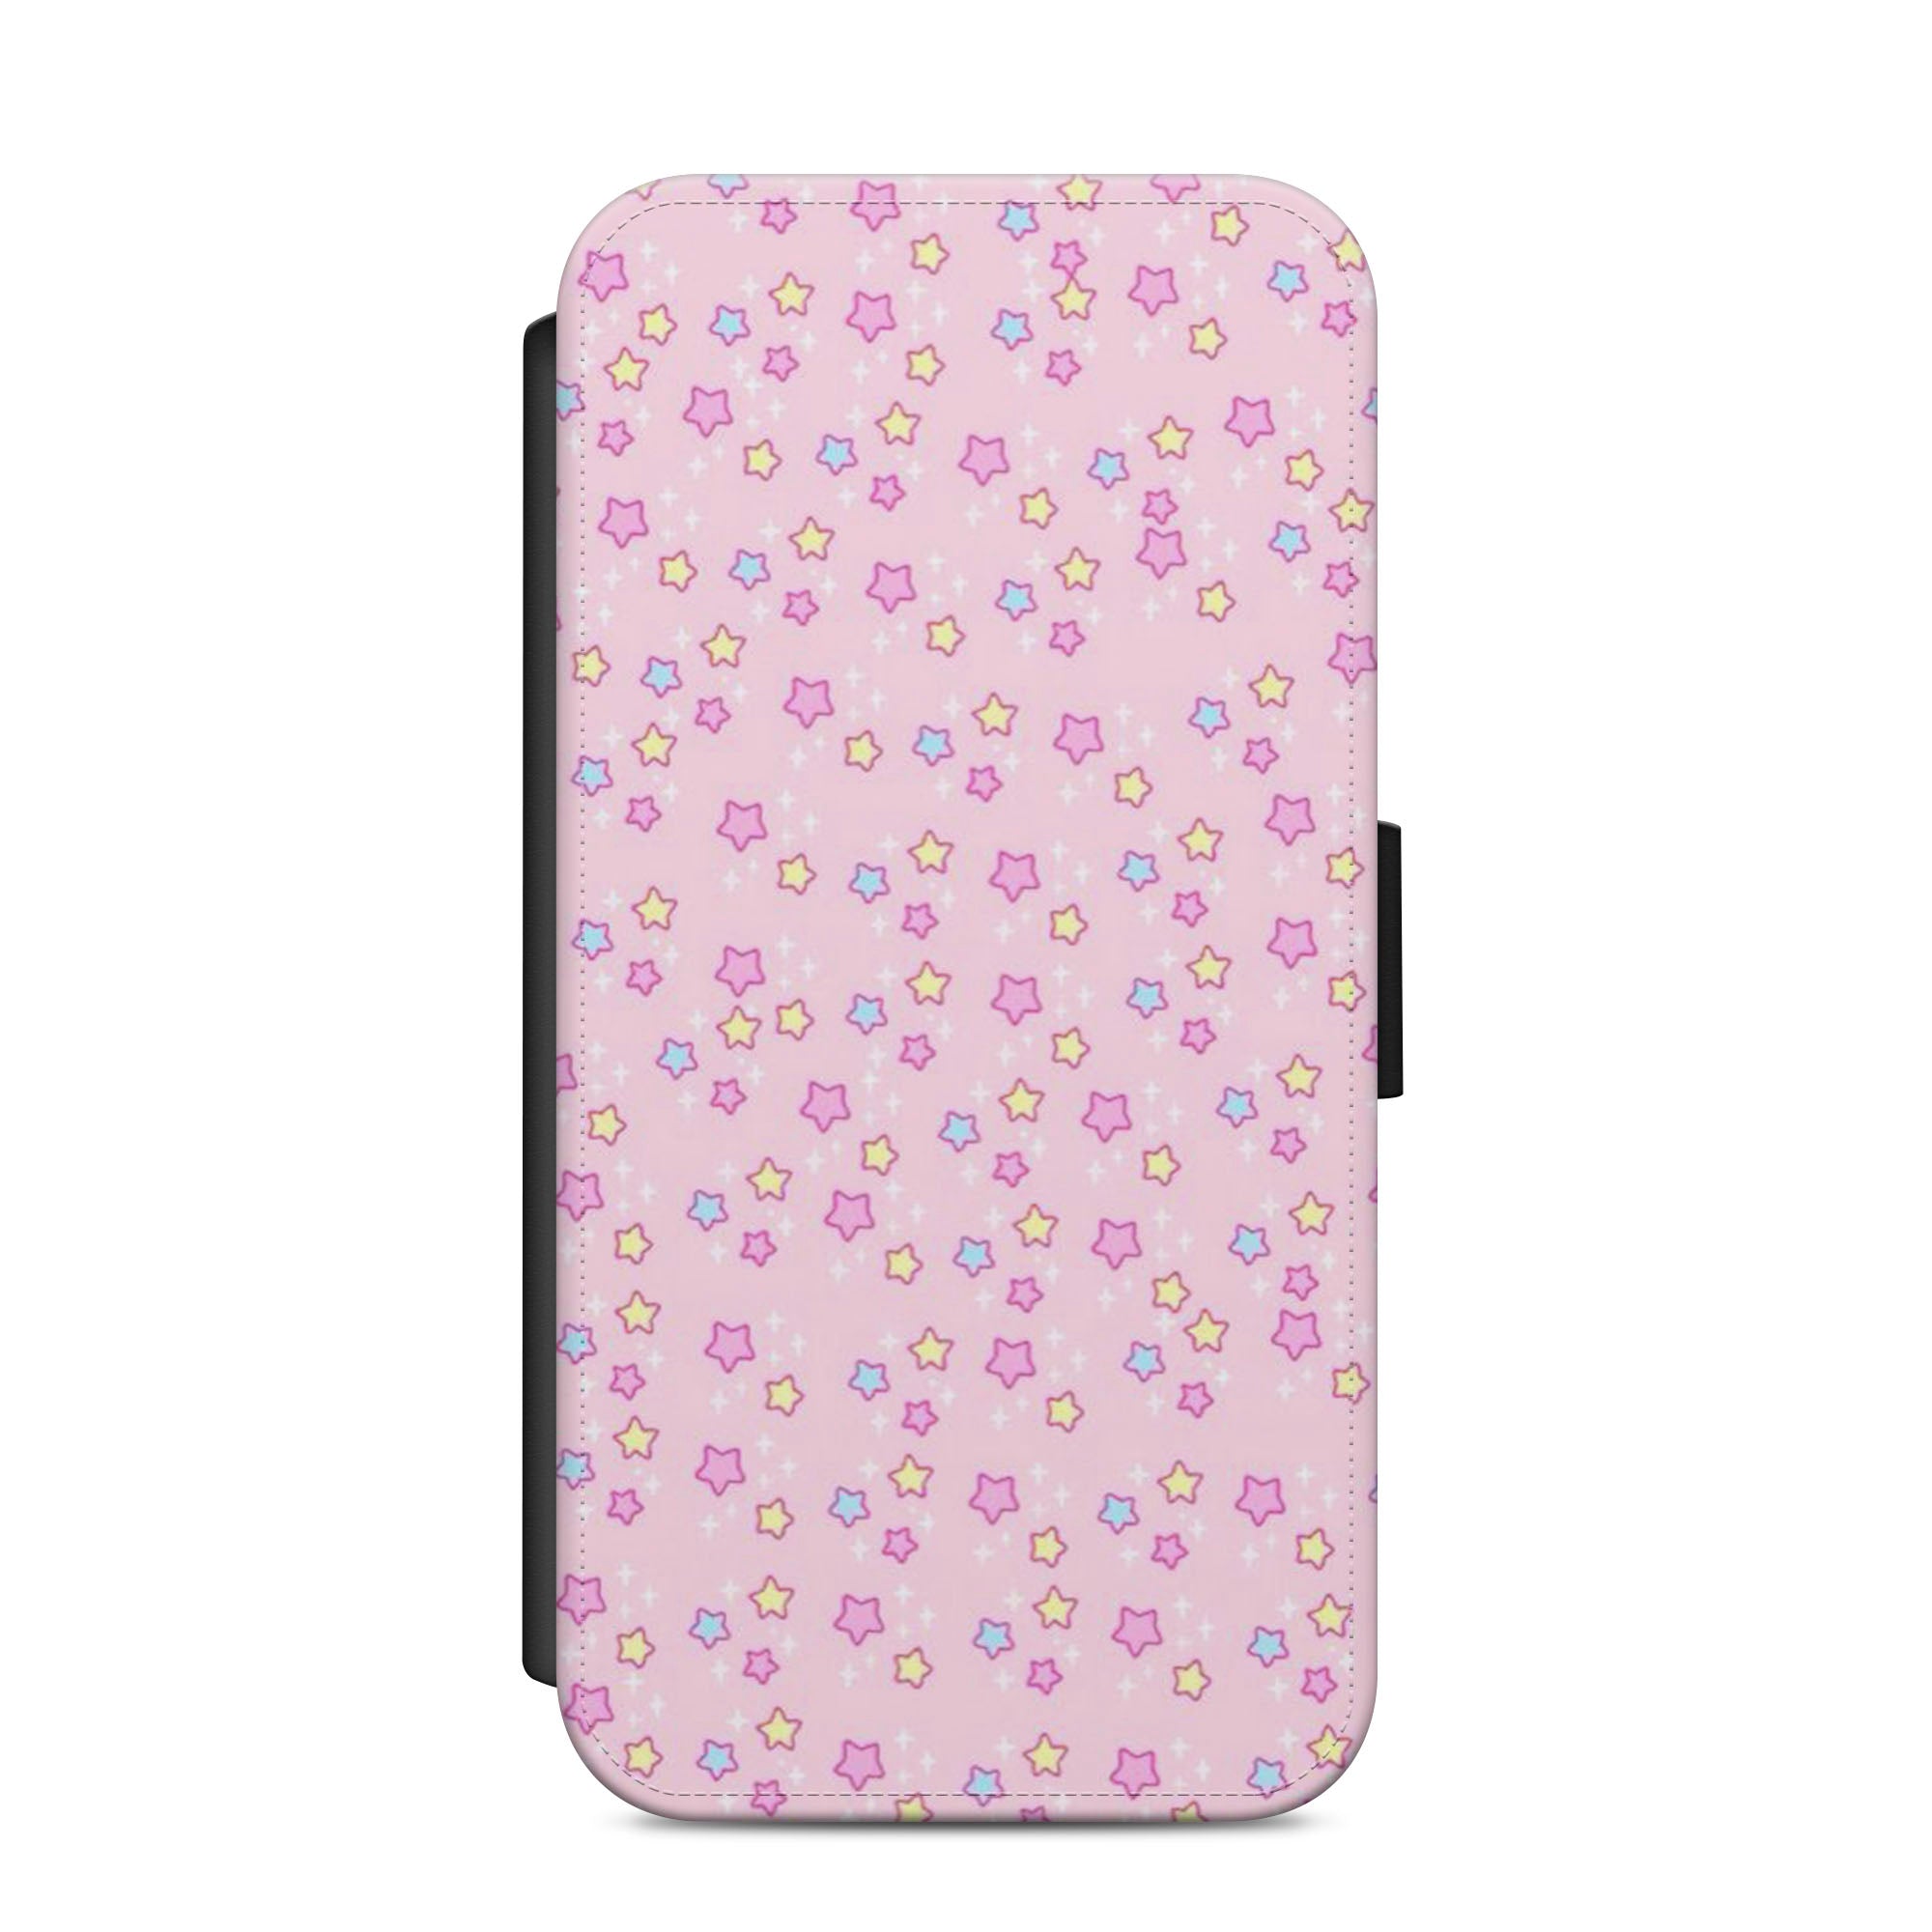 Stars On Pink Faux Leather Flip Case Wallet for iPhone / Samsung